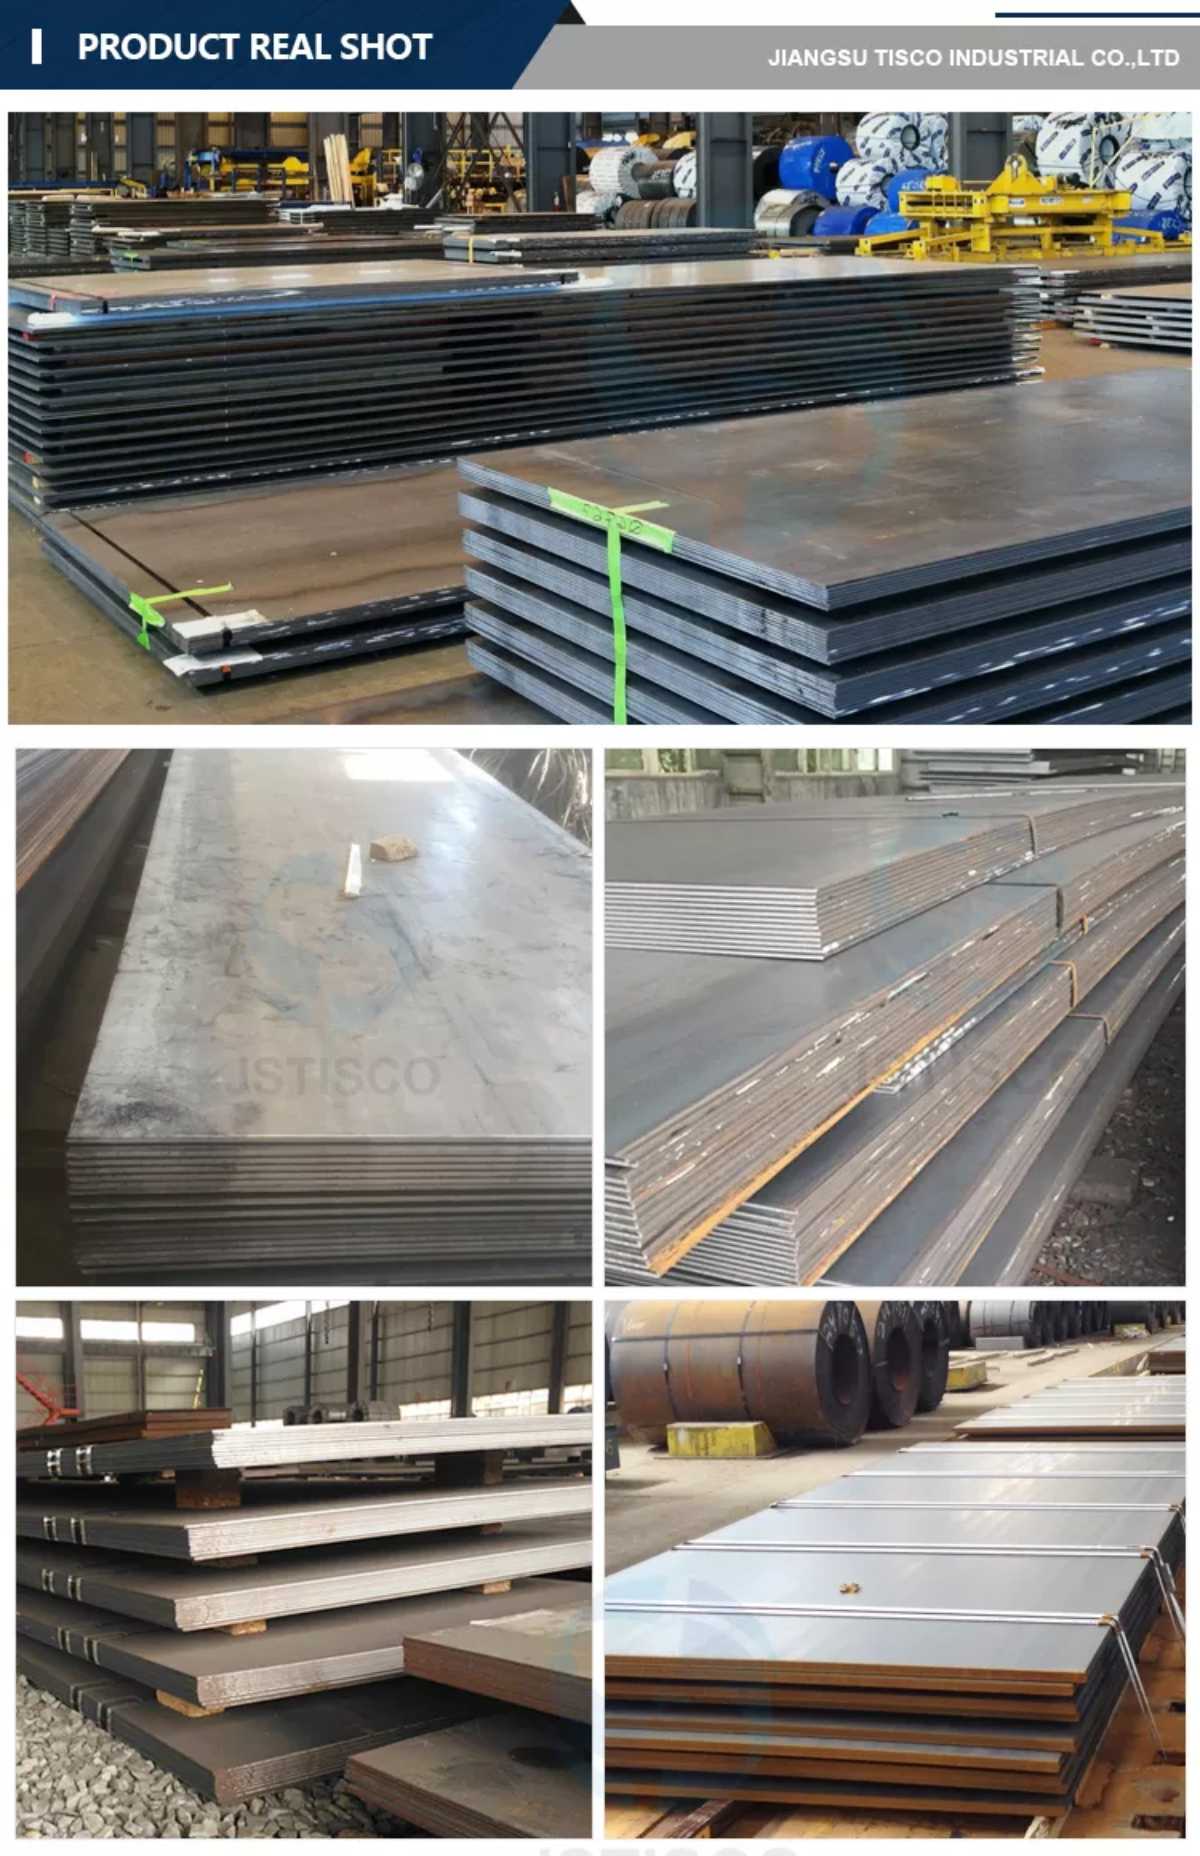 Details of Carbon Steel Plate